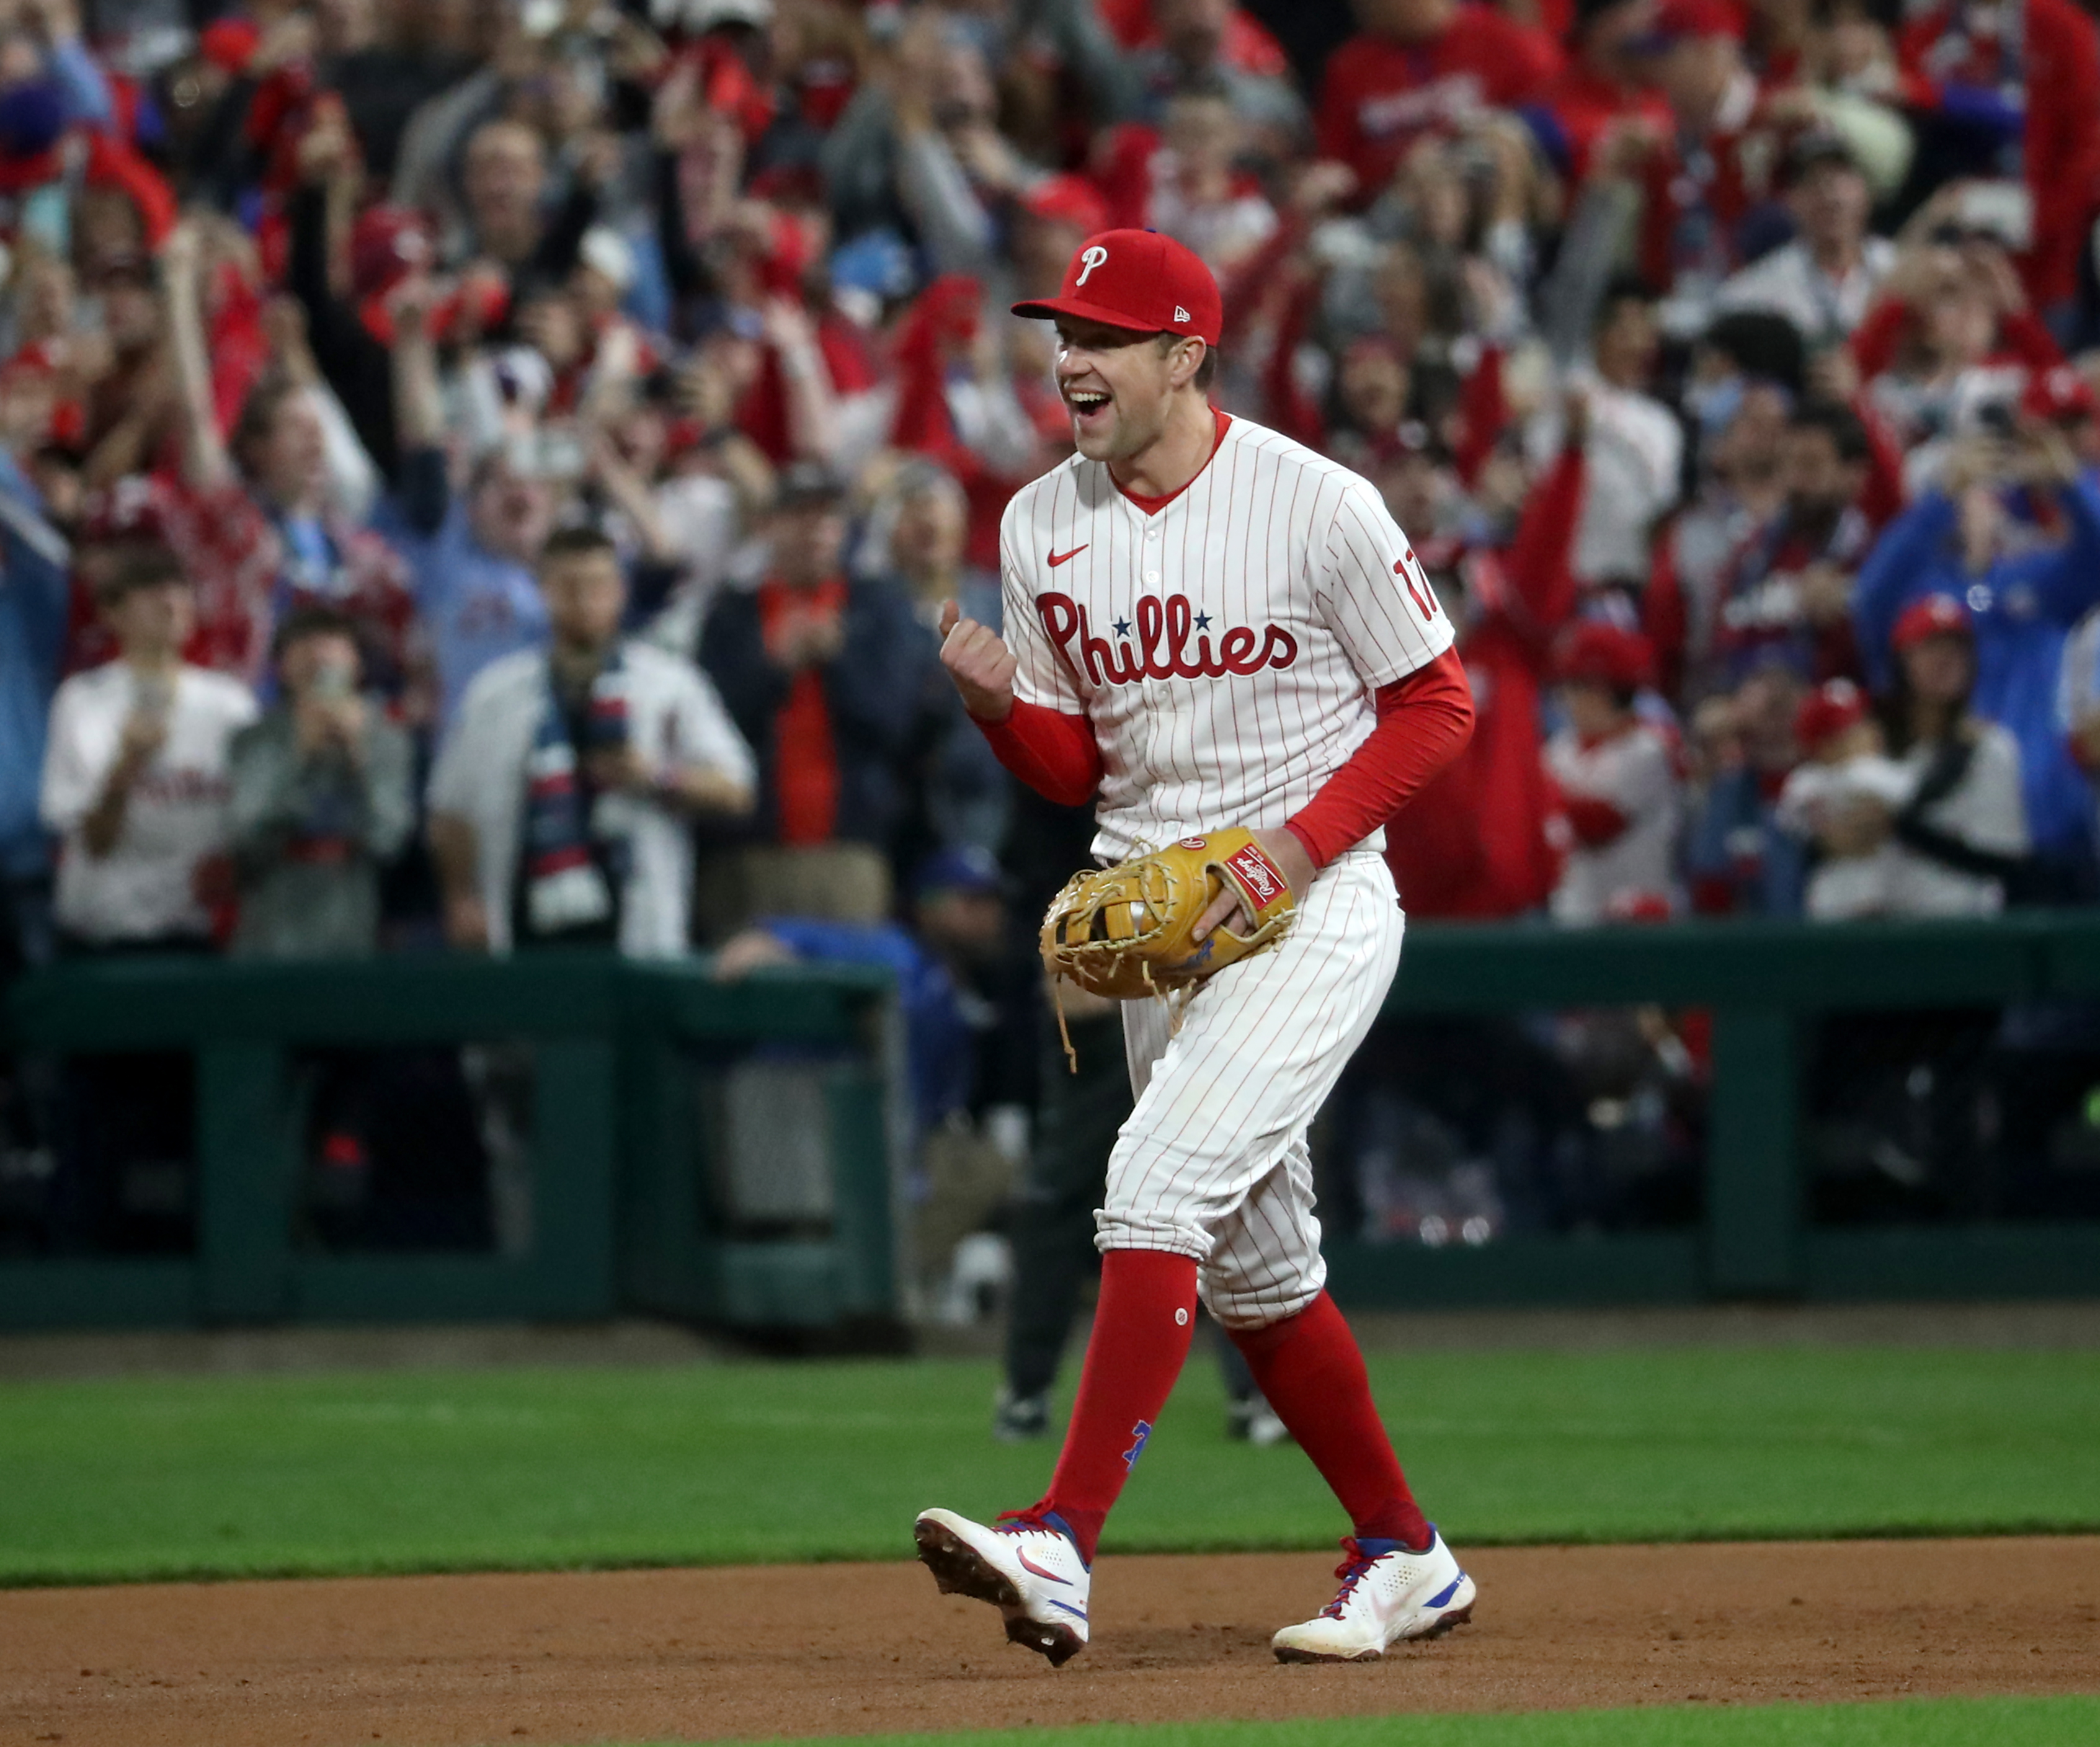 Rhys Hoskins (17) of the Philadelphia Phillies celebrates a 7-0 win during World Series Game 3 against the Houston Astros at Citizens Bank Park, Tuesday, Nov. 1, 2022.